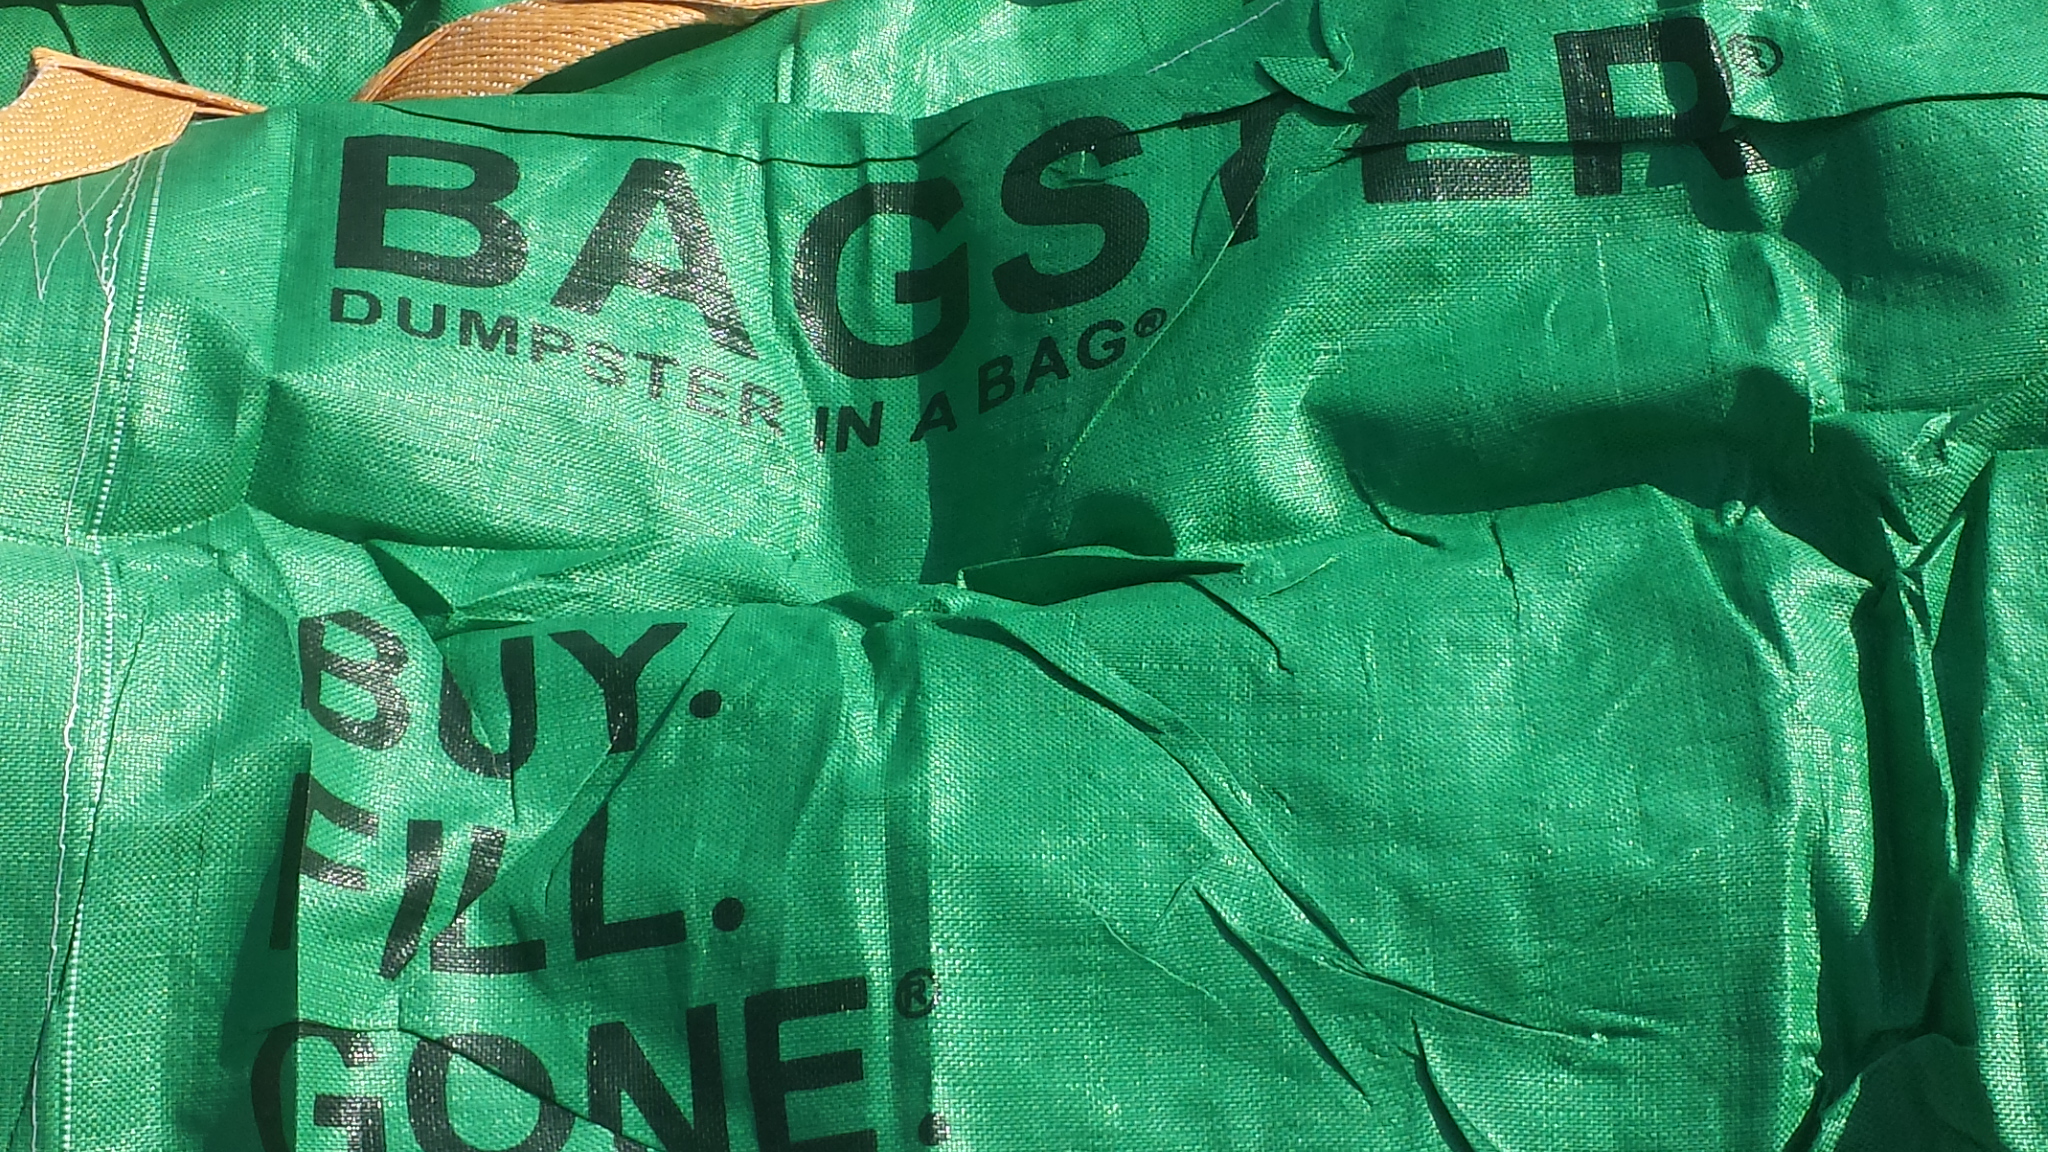 Bagster Review (Waste Management's Alternative to Dumpster Rental)